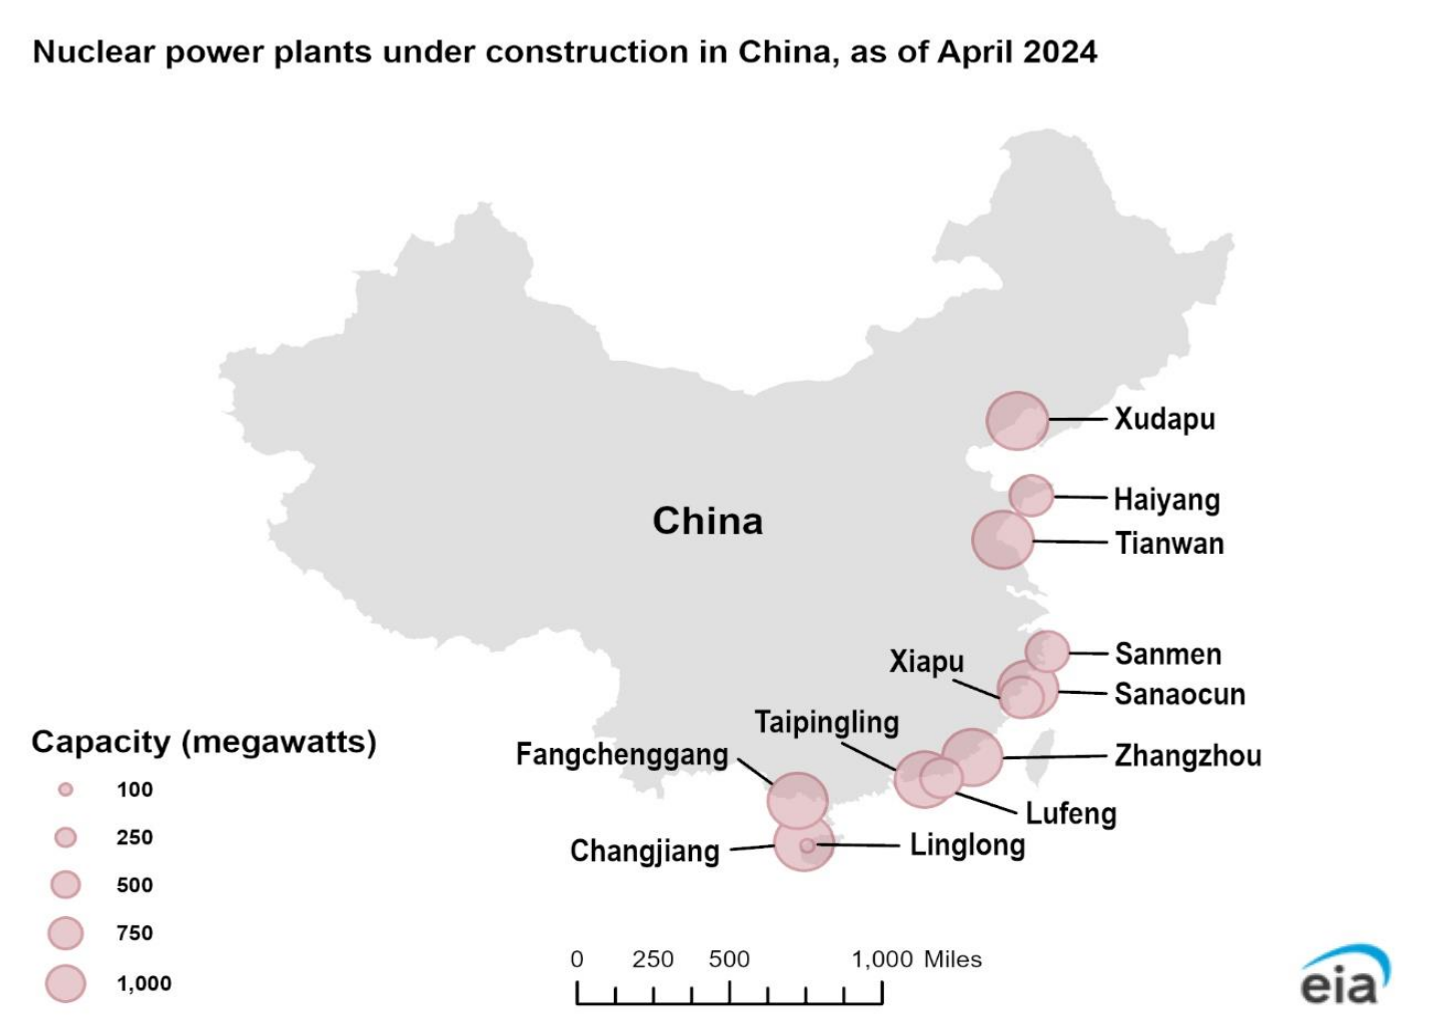 nuclear power plants under construction in China as of April 2024